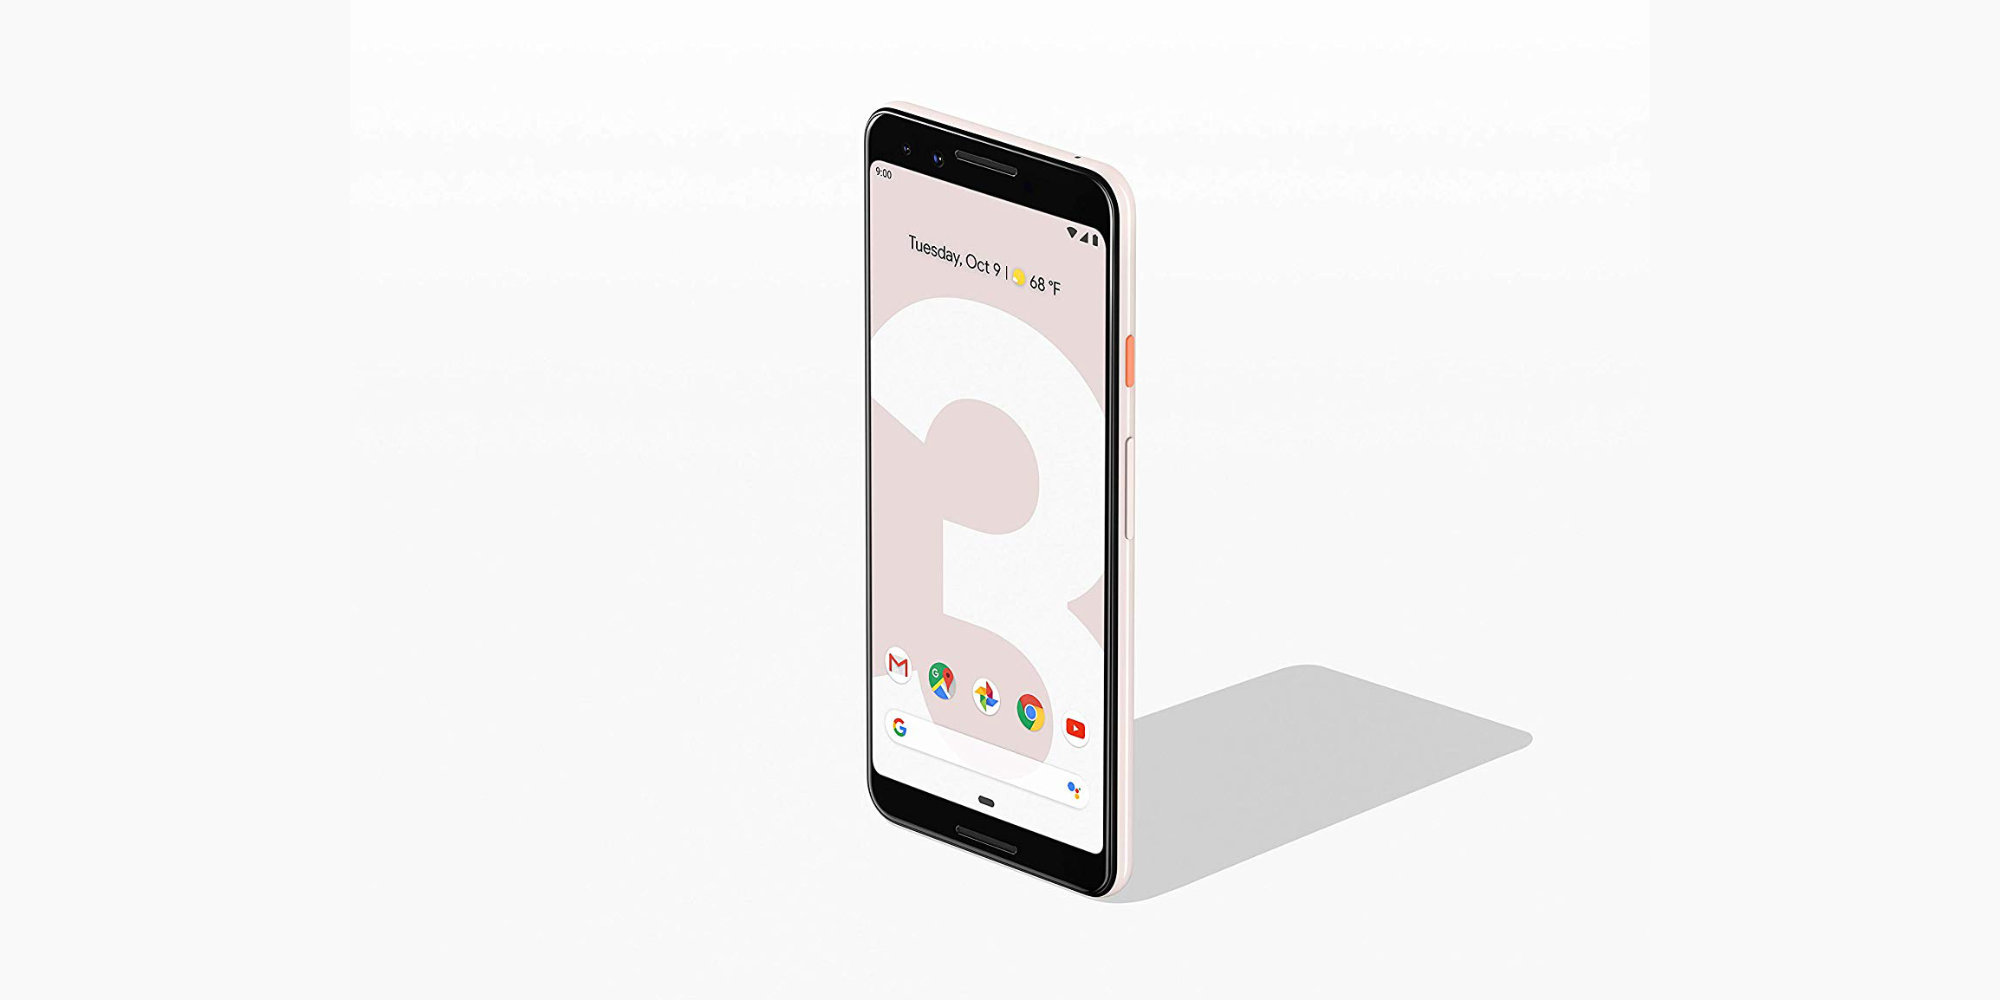 Score Google's Pixel 3 64GB smartphone at low from $130